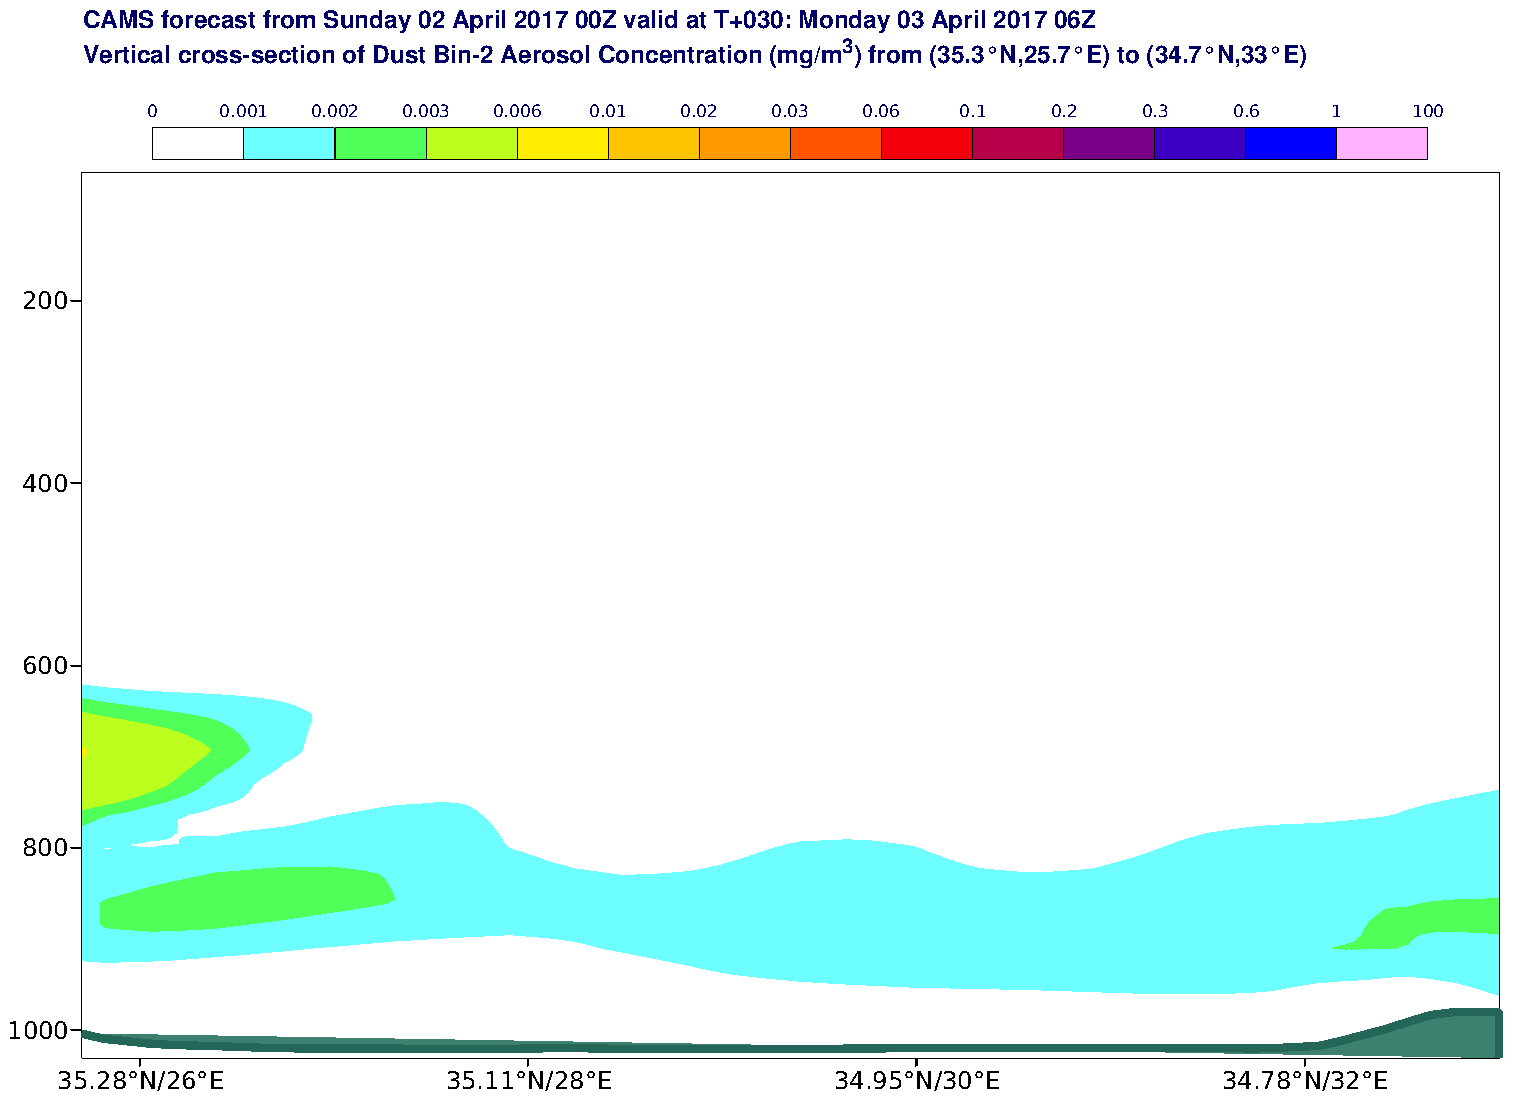 Vertical cross-section of Dust Bin-2 Aerosol Concentration (mg/m3) valid at T30 - 2017-04-03 06:00